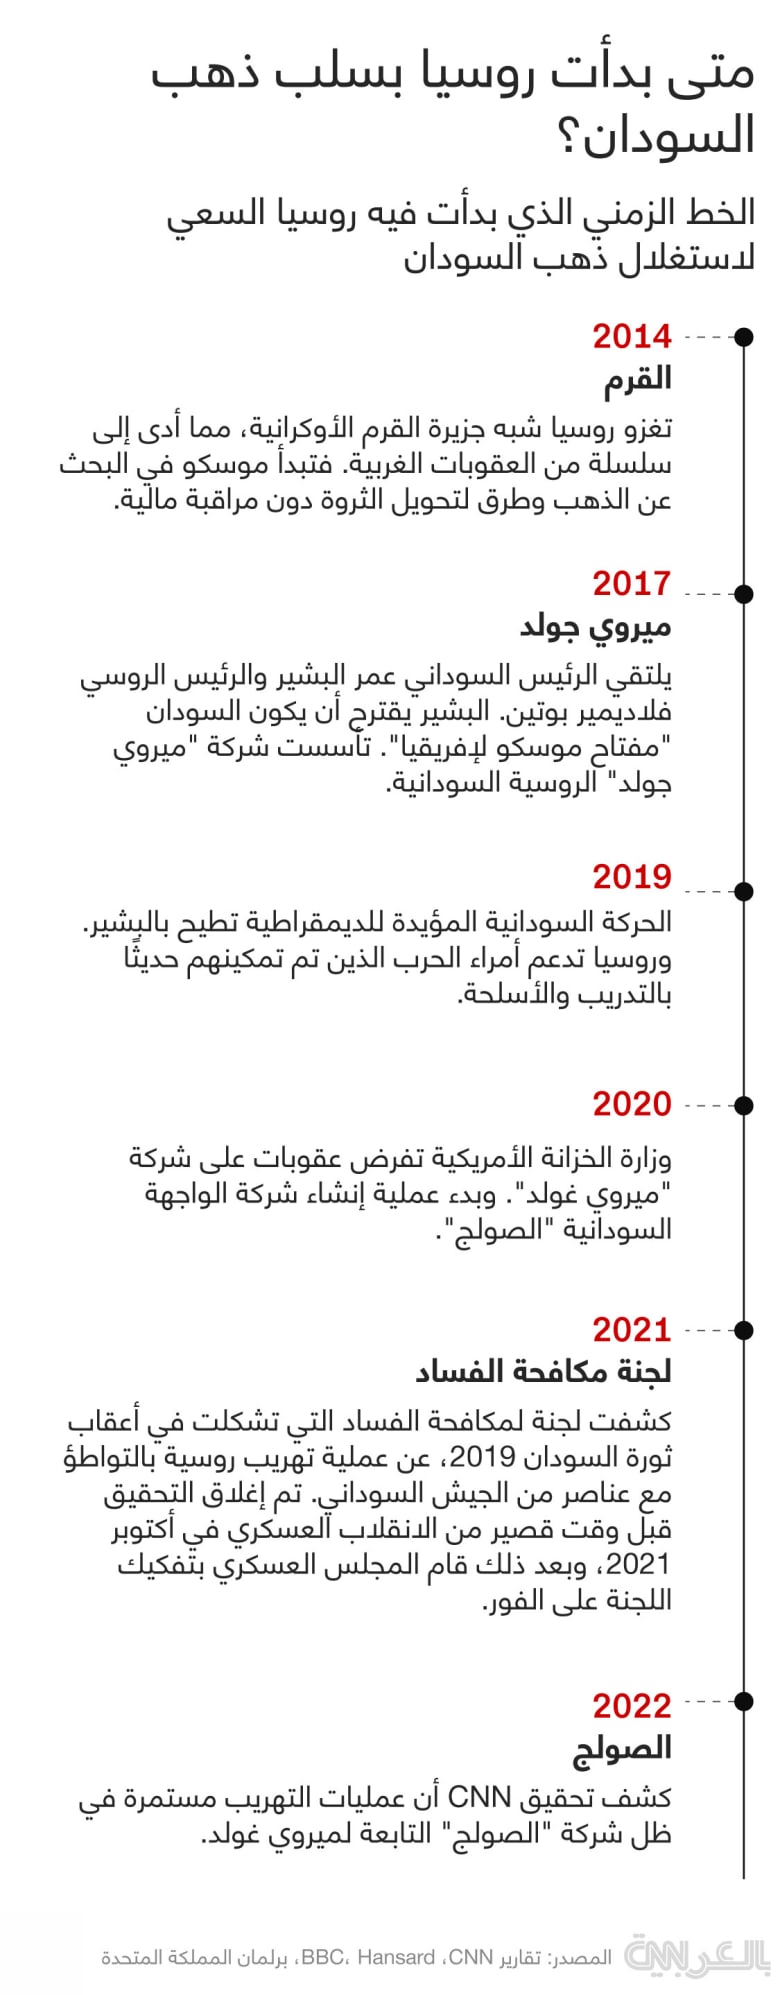 russia-gold-sudan-timeline-infographic